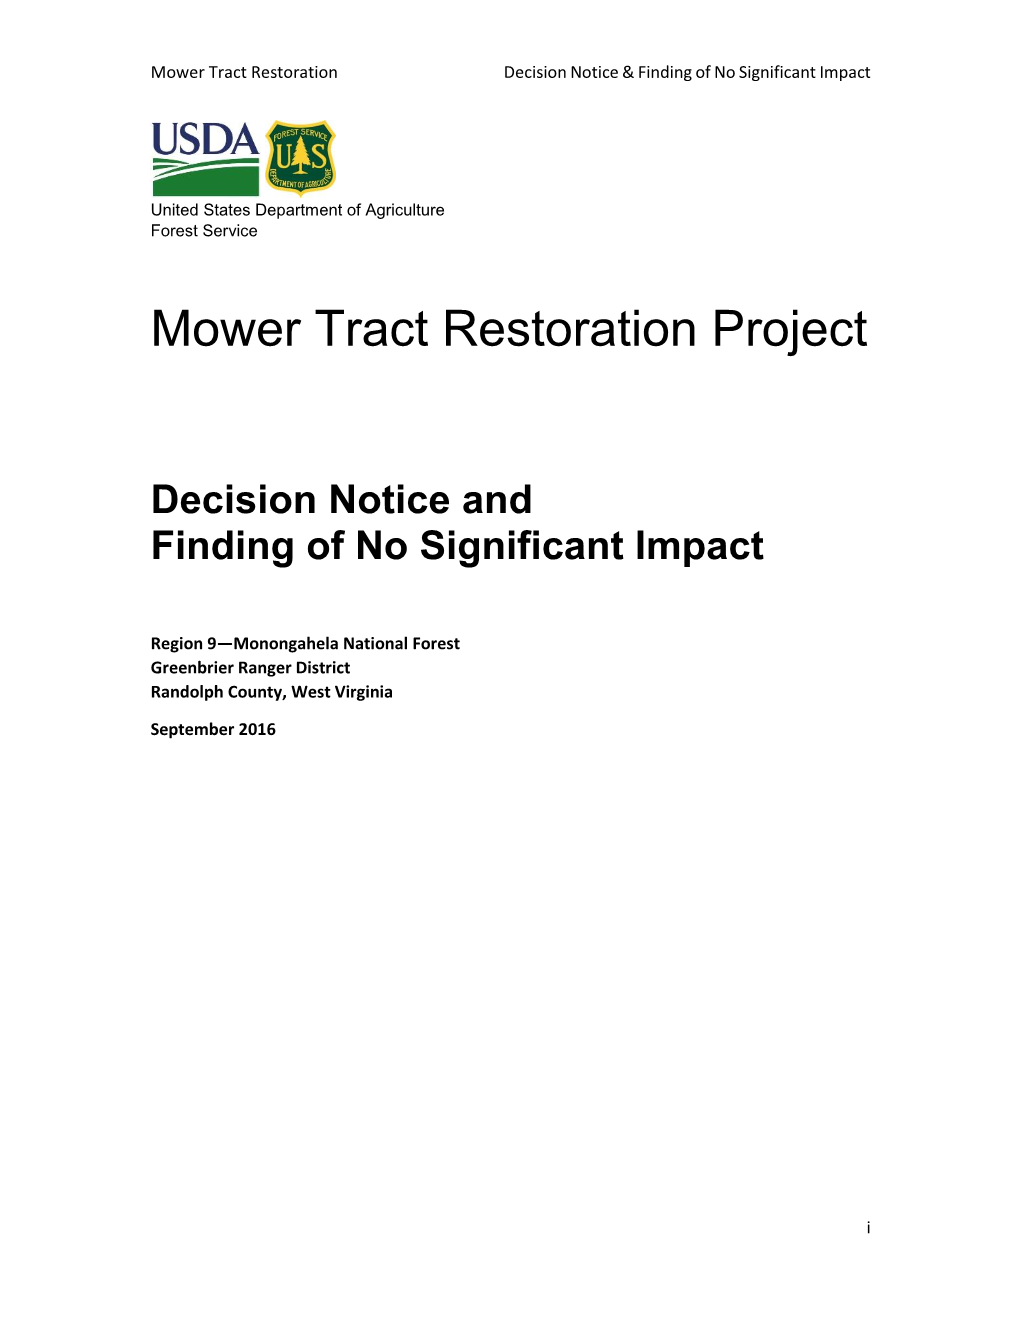 Mower Tract Restoration Project